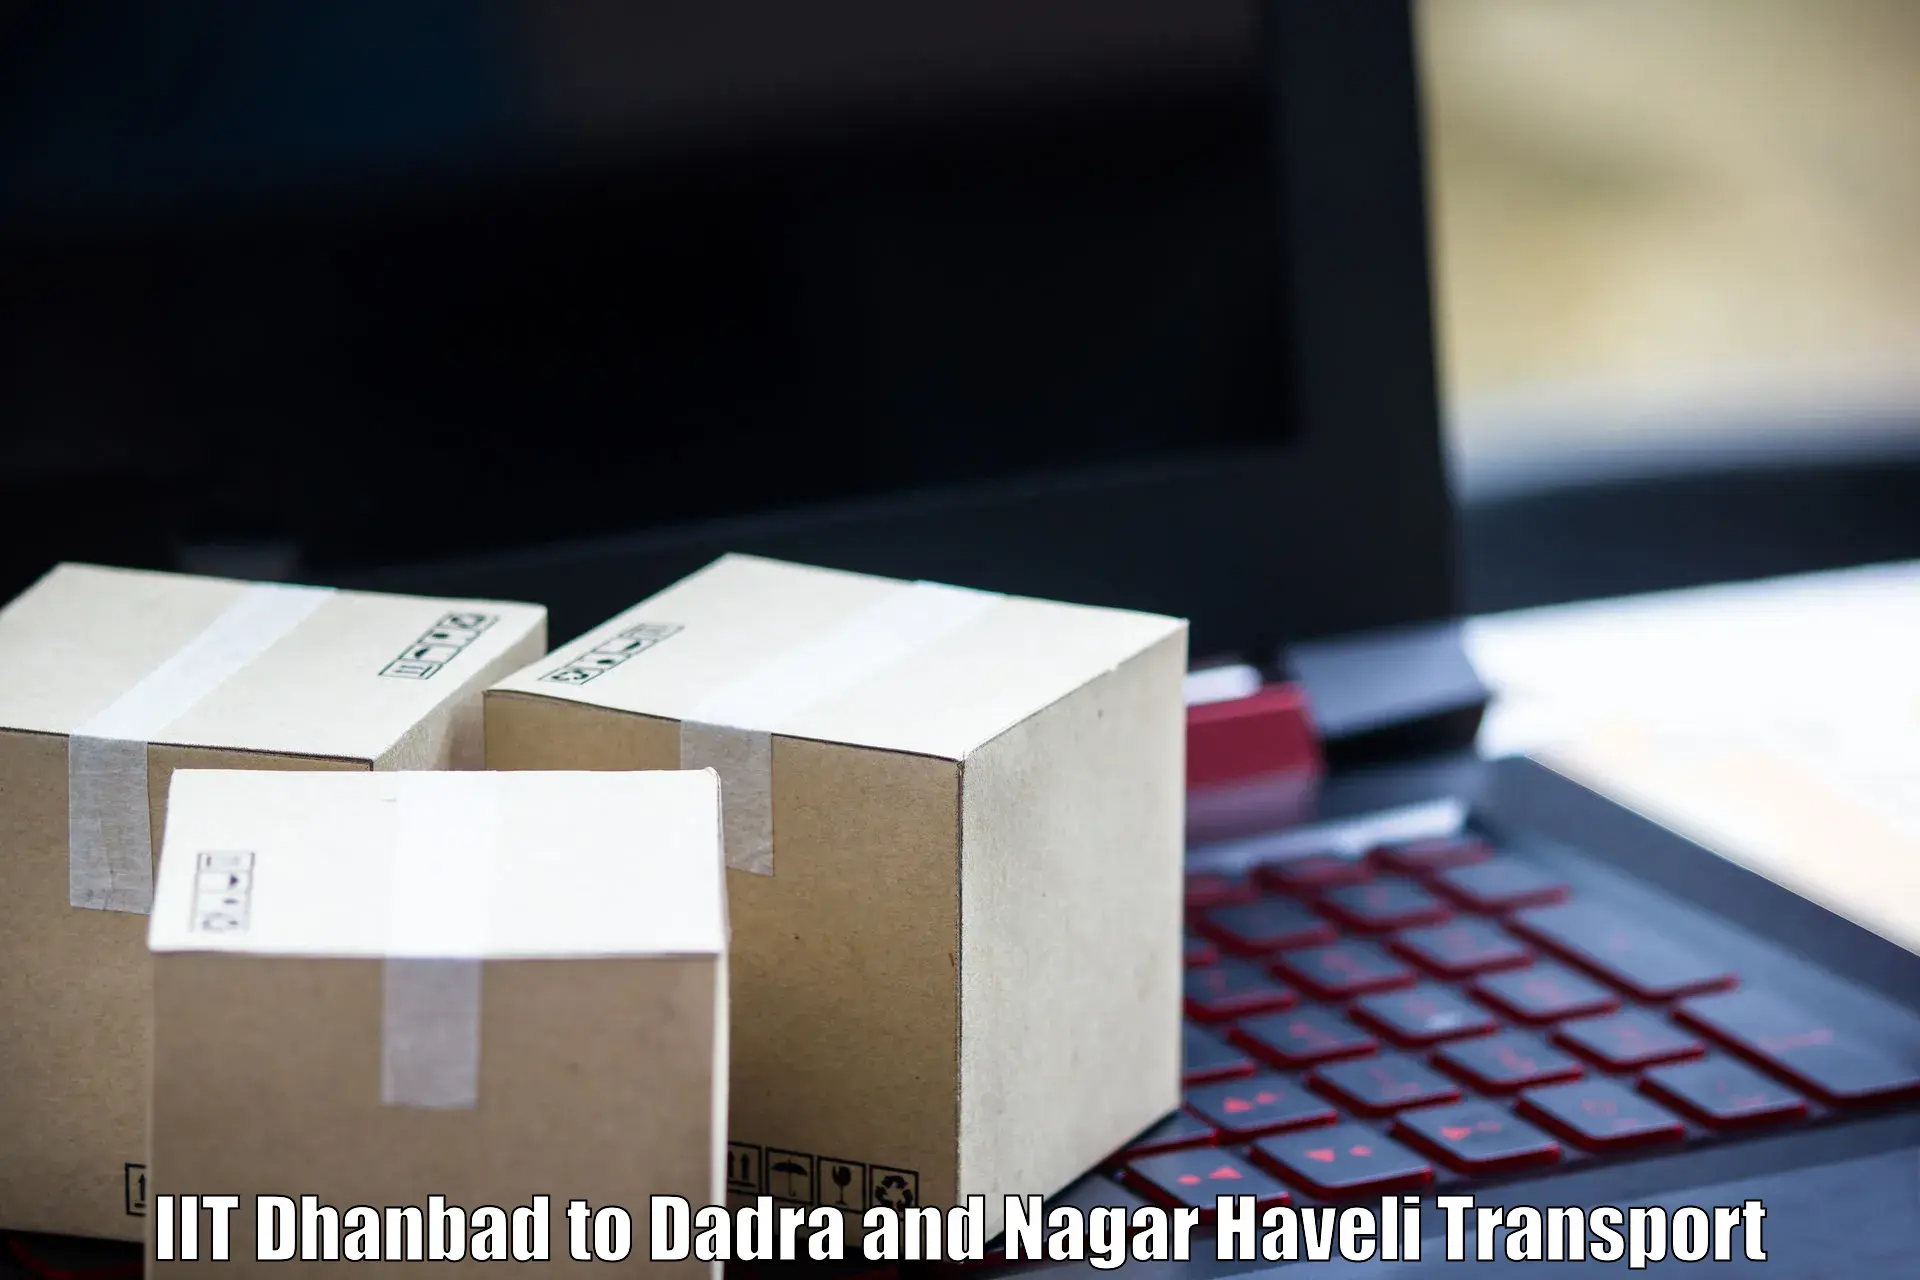 Best transport services in India IIT Dhanbad to Dadra and Nagar Haveli